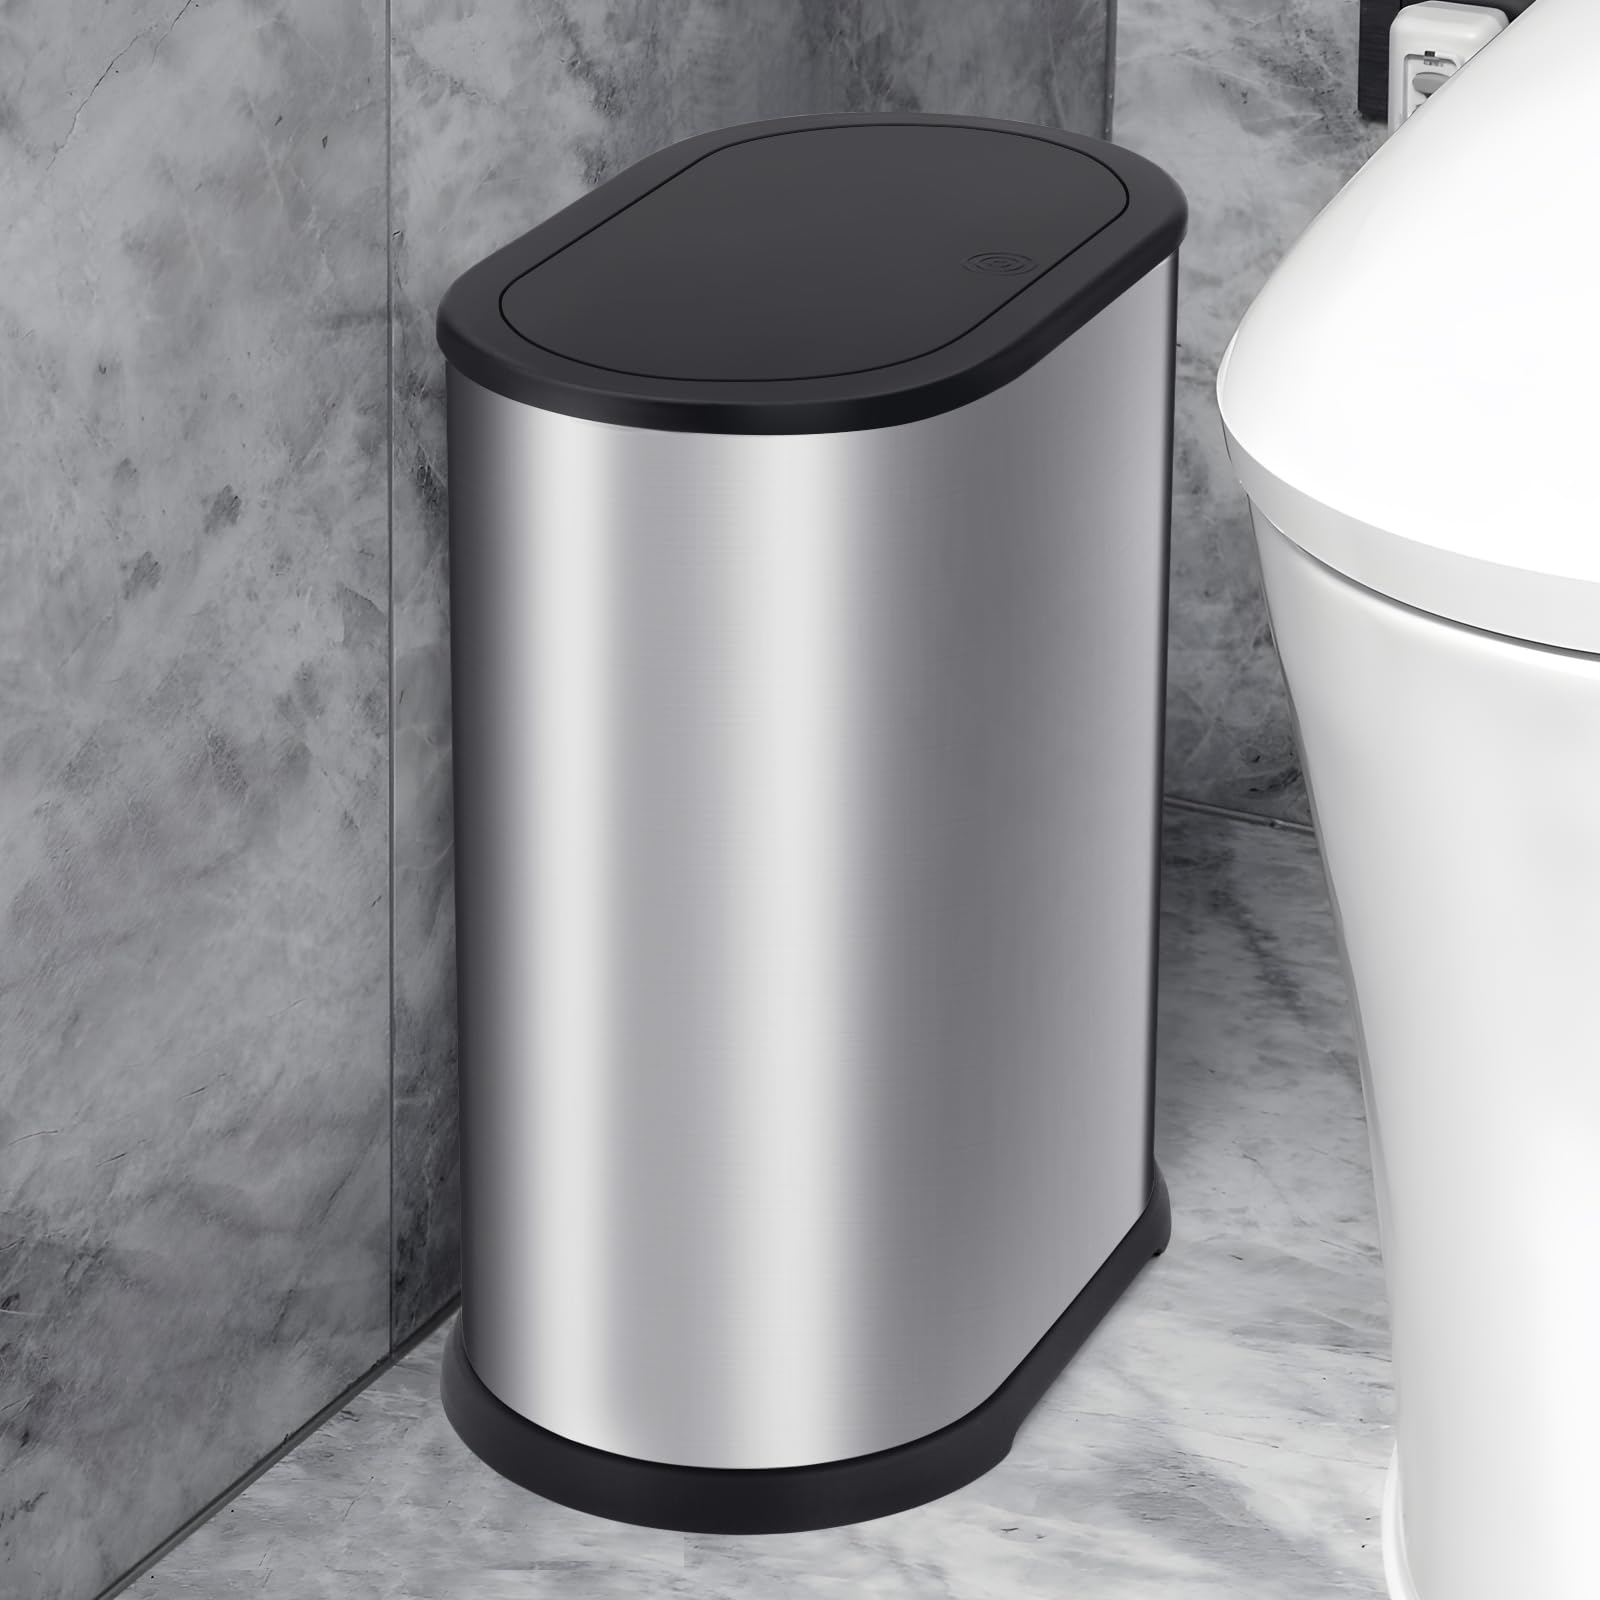 Anzoymx Stainless Steel Bathroom Trash Cans